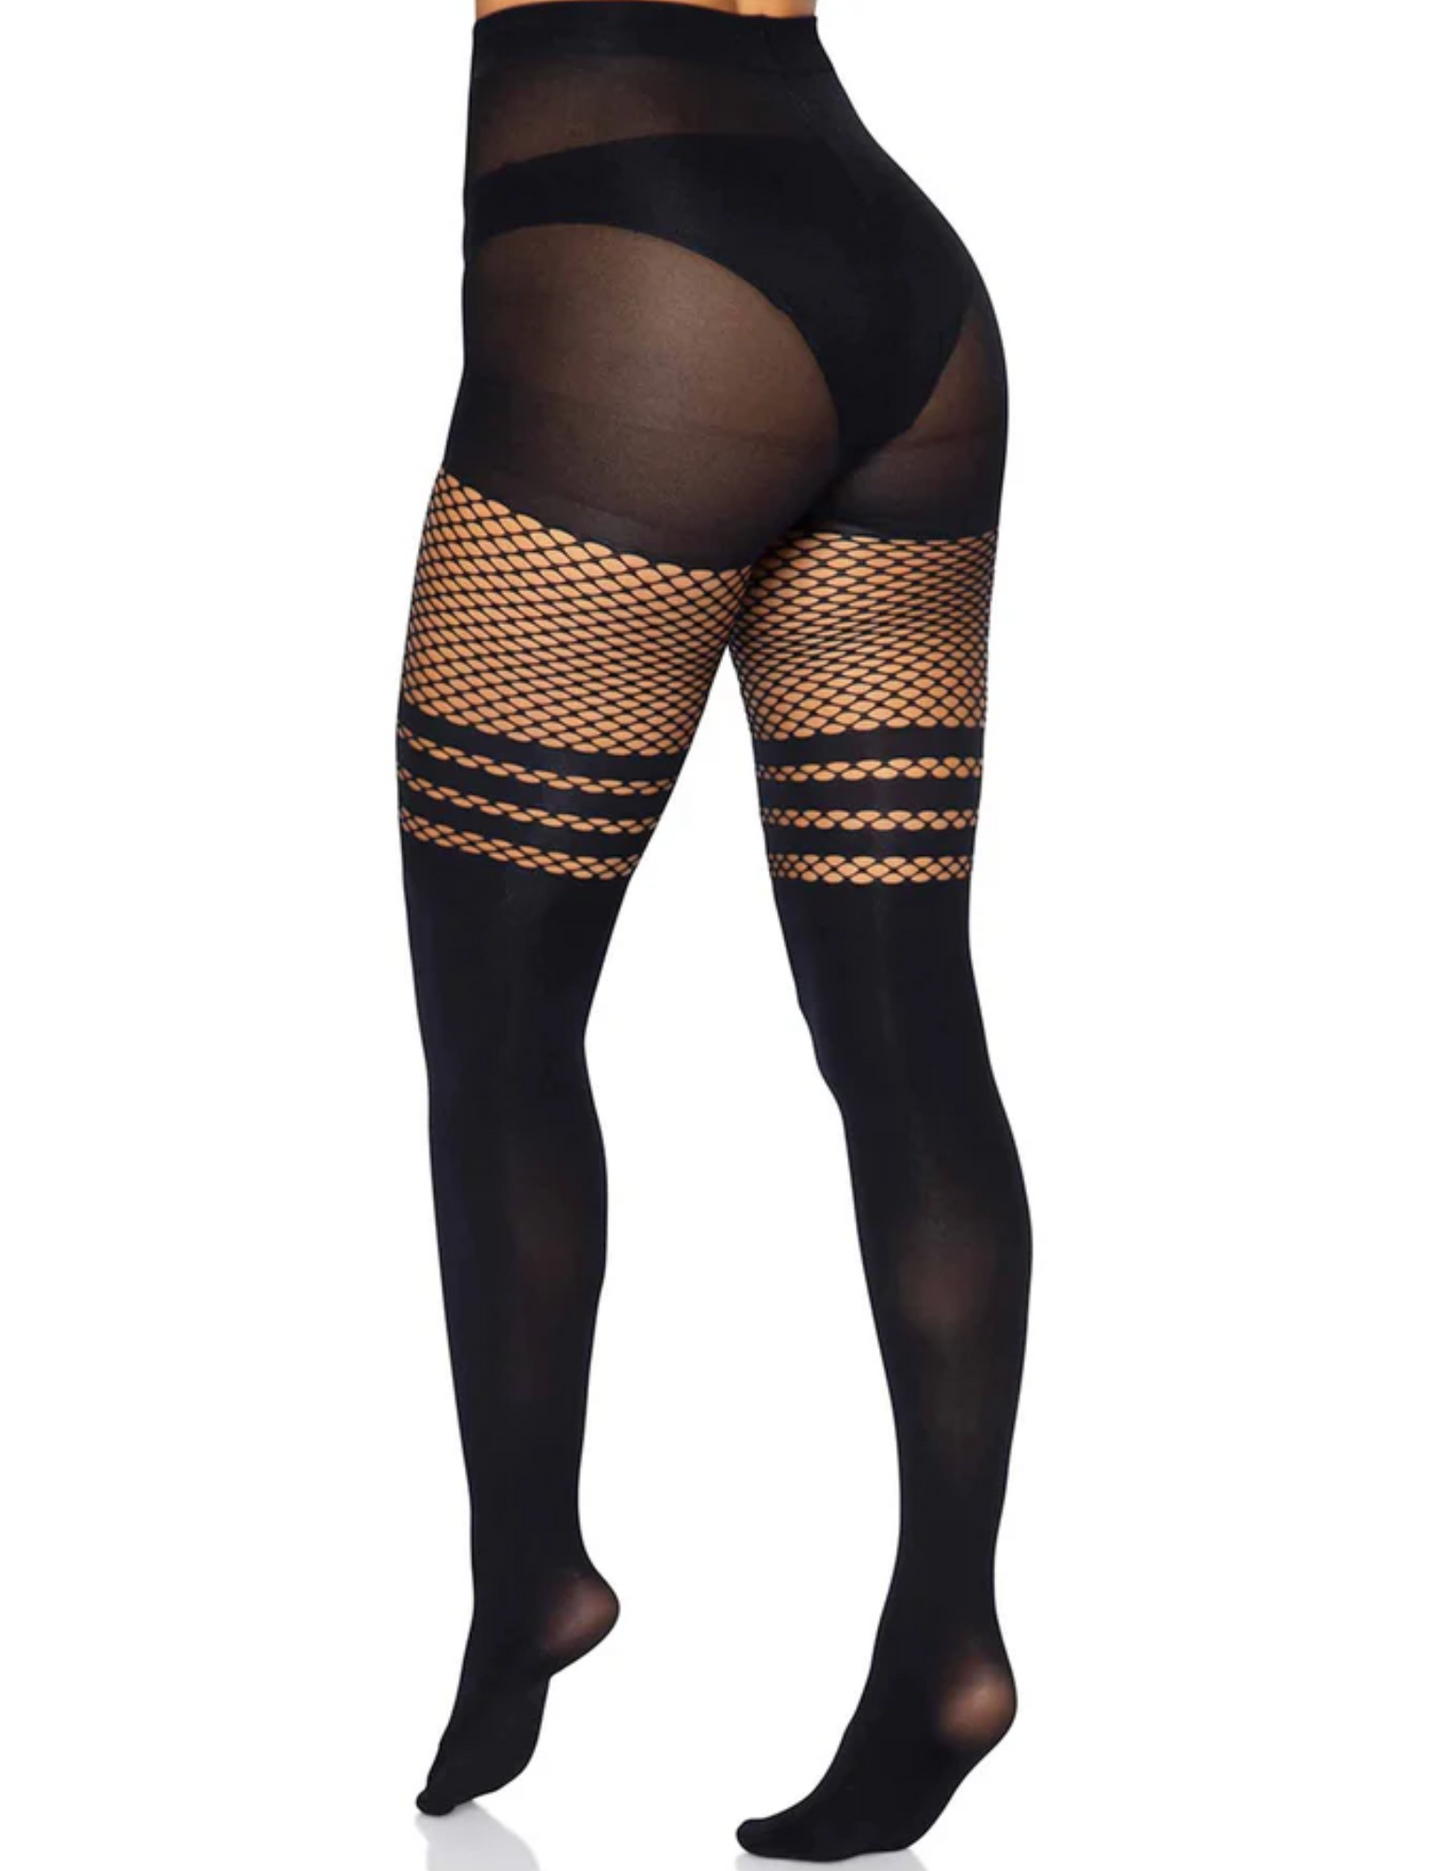 Photo shows the back of a model wearing the Opaque Thigh High w/ Stripes by Leg Avenue (black, OS).